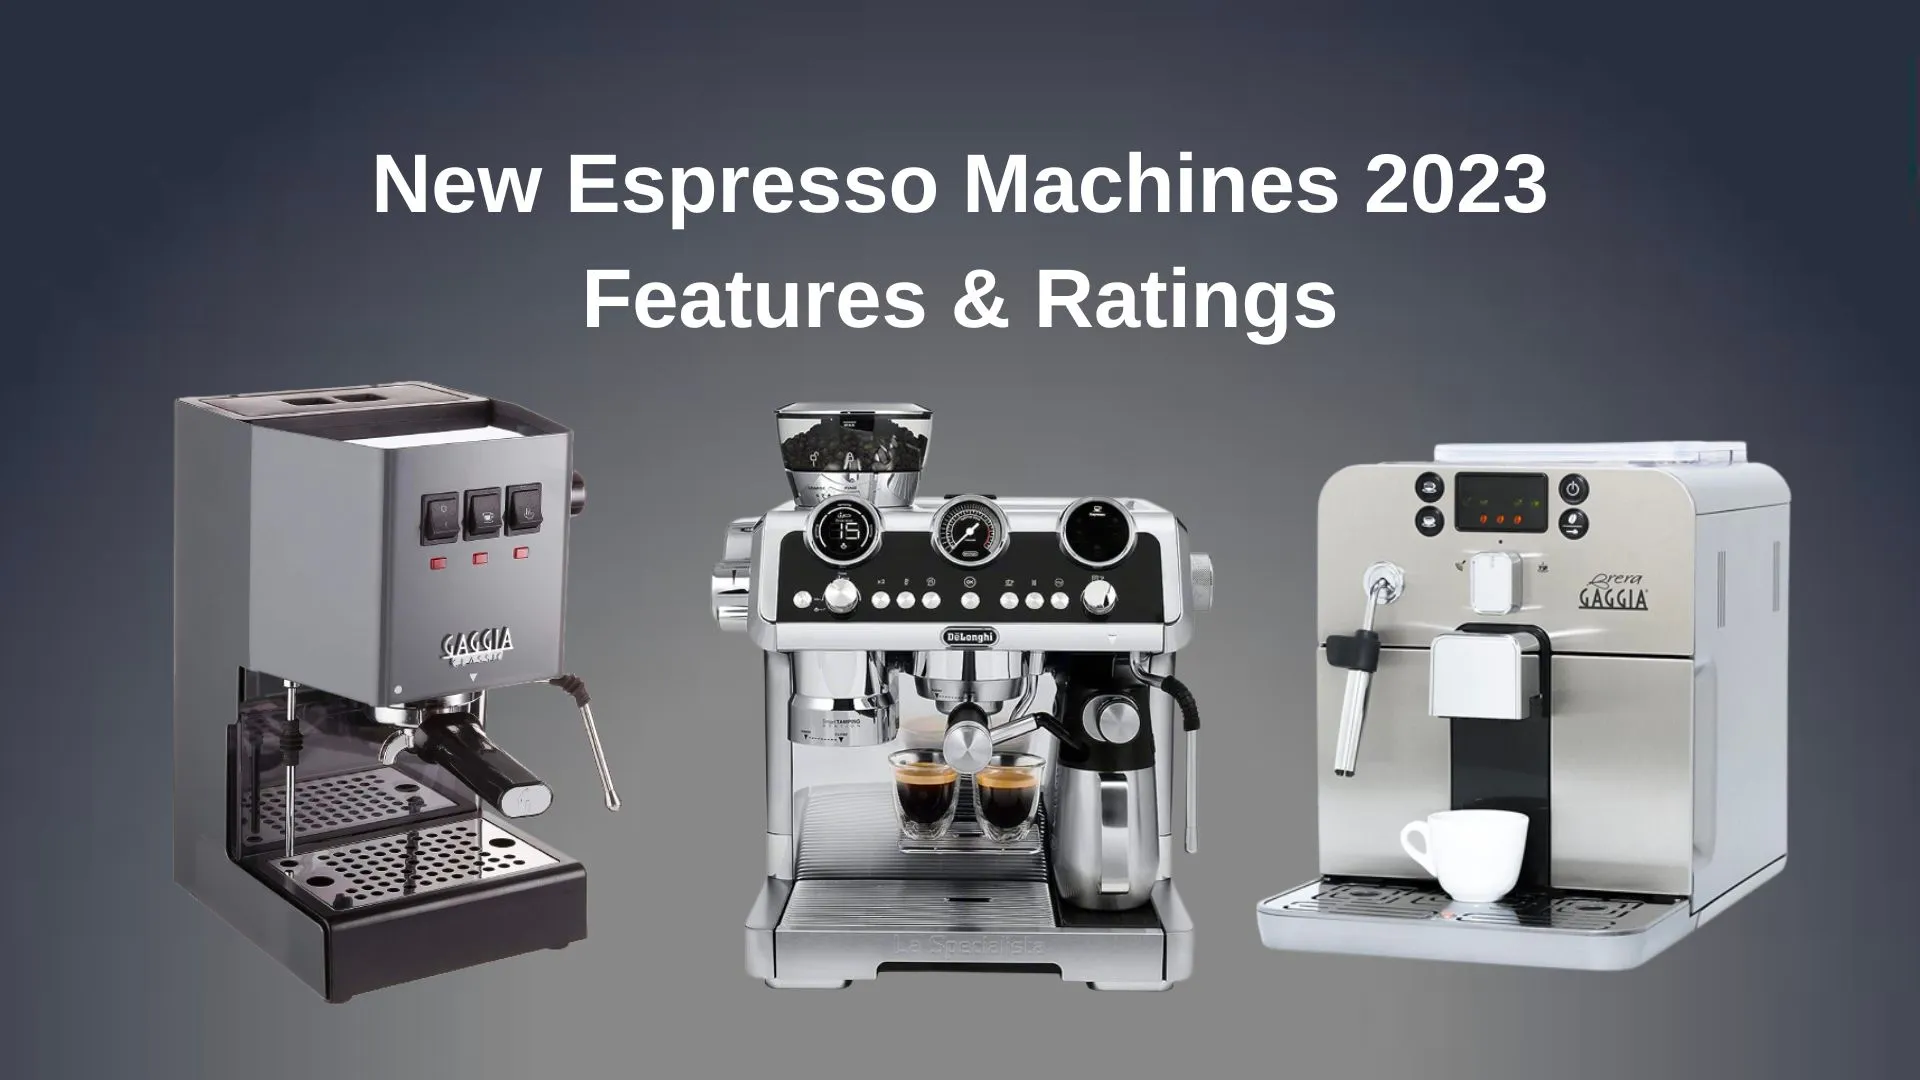 New espresso machines 2023: Feature and ratings